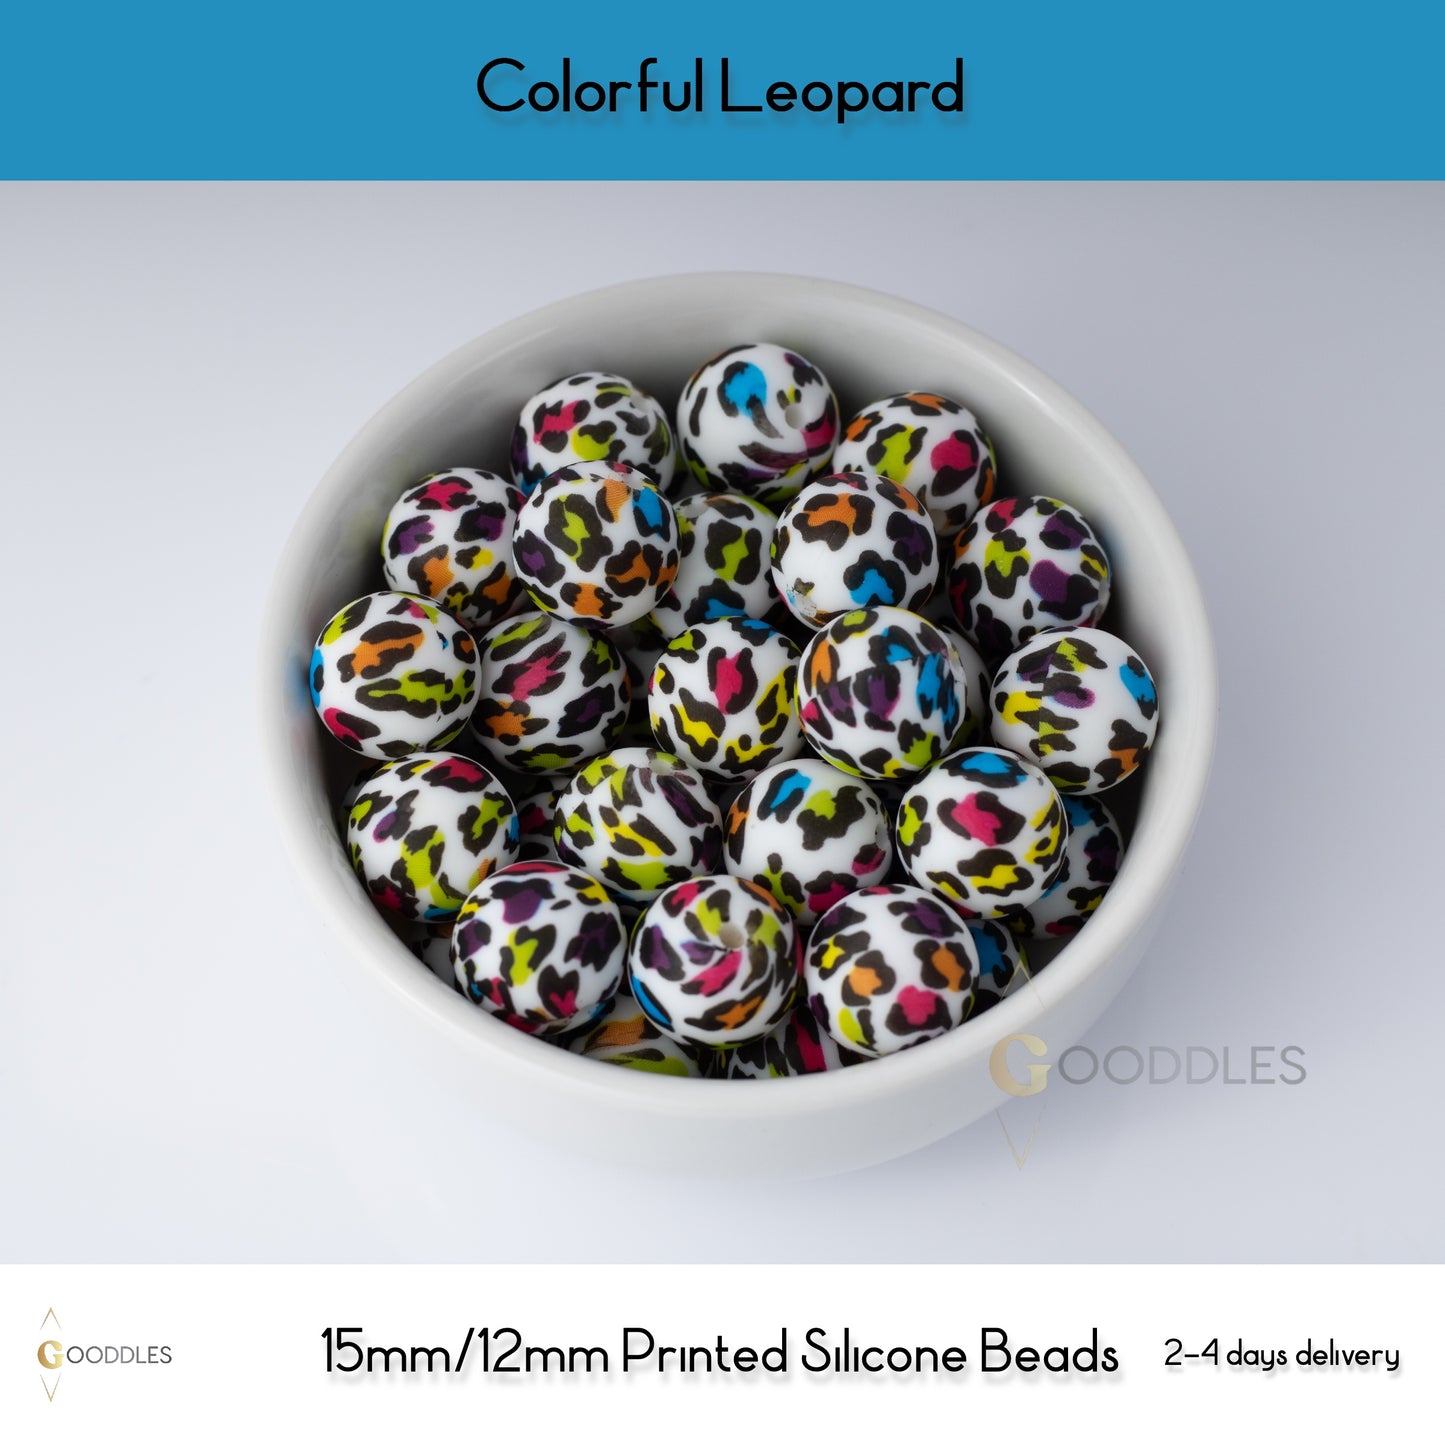 5pcs, Colorful Leopard Silicone Beads Printed Round Silicone Beads